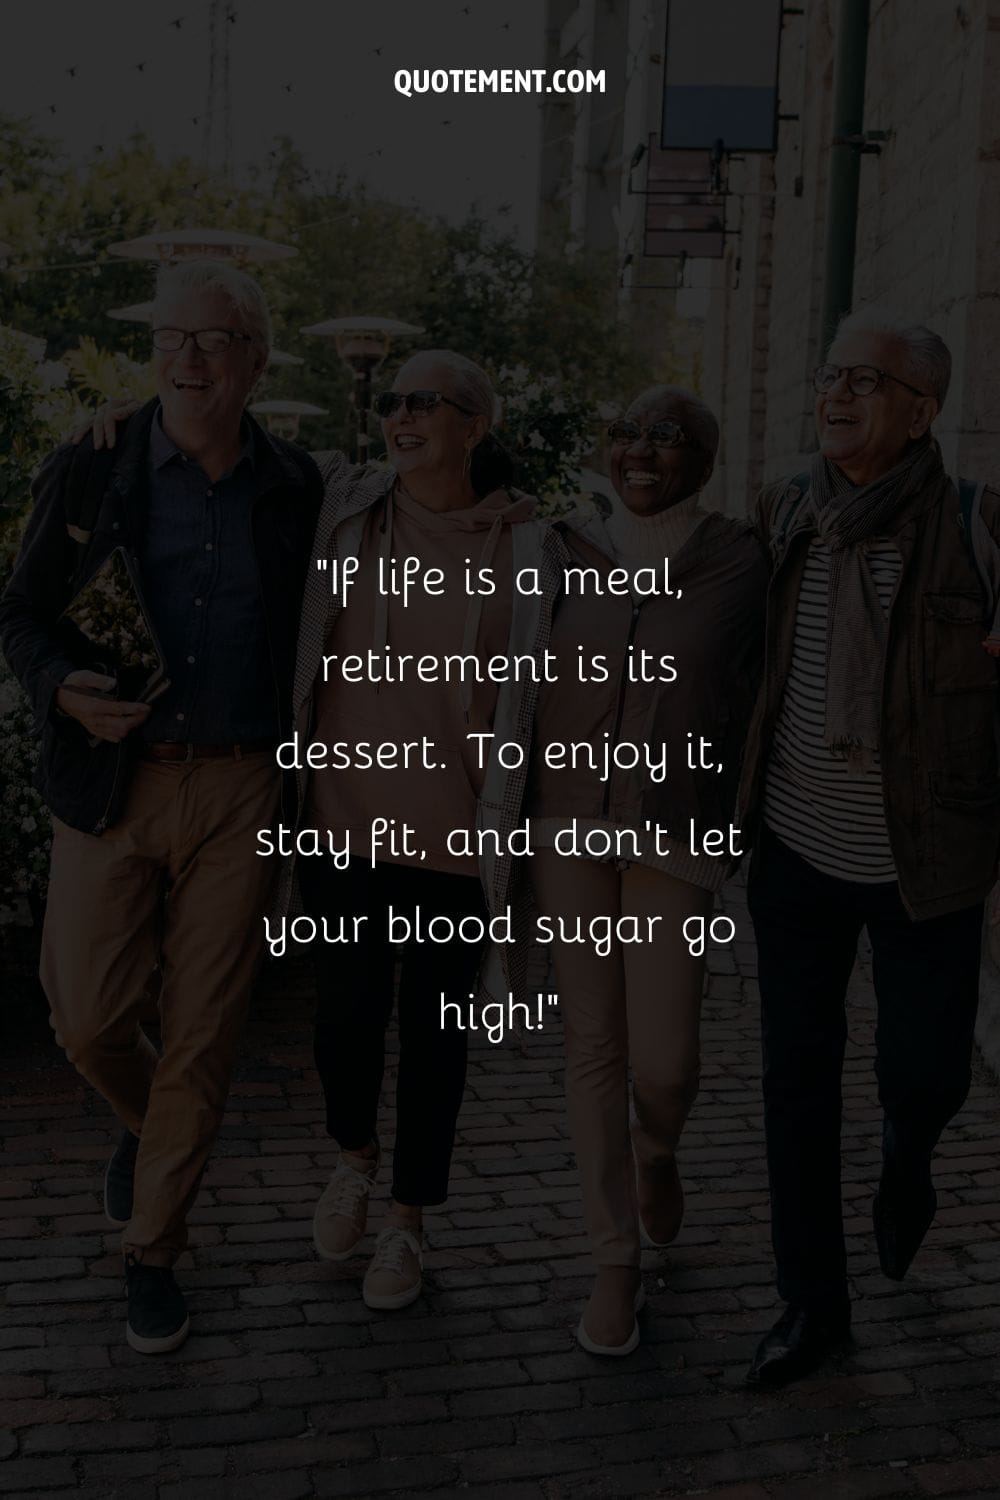 Chic seniors strolling city streets representing friend retirement quote